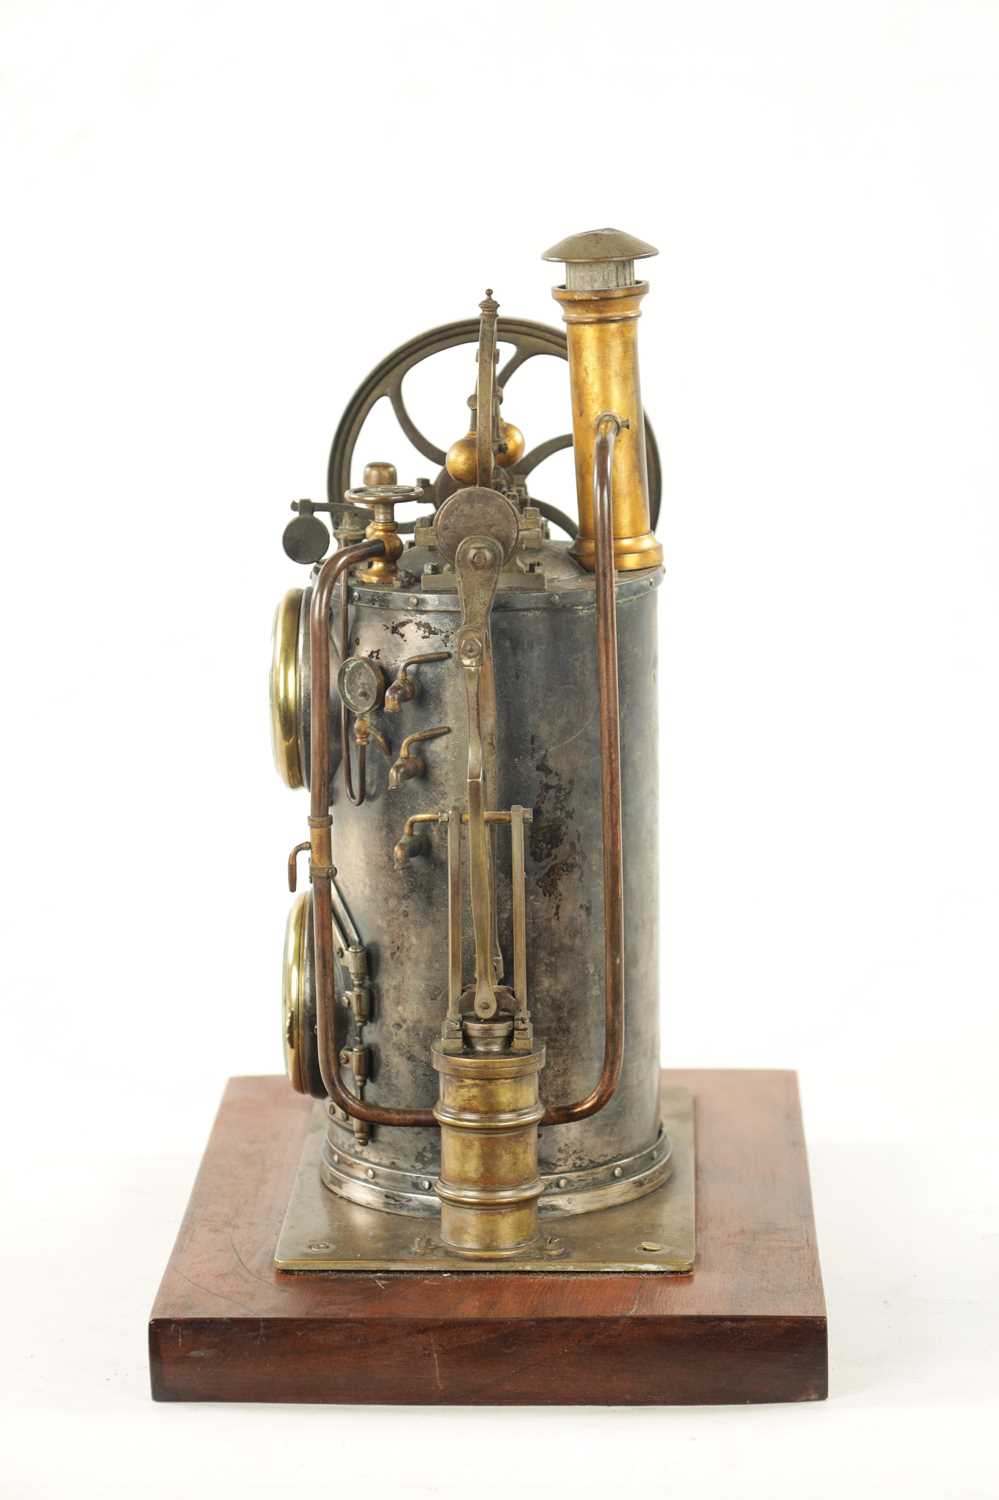 A RARE LATE 19TH CENTURY FRENCH INDUSTRIAL AUTOMATON MANTEL CLOCK - Image 5 of 8